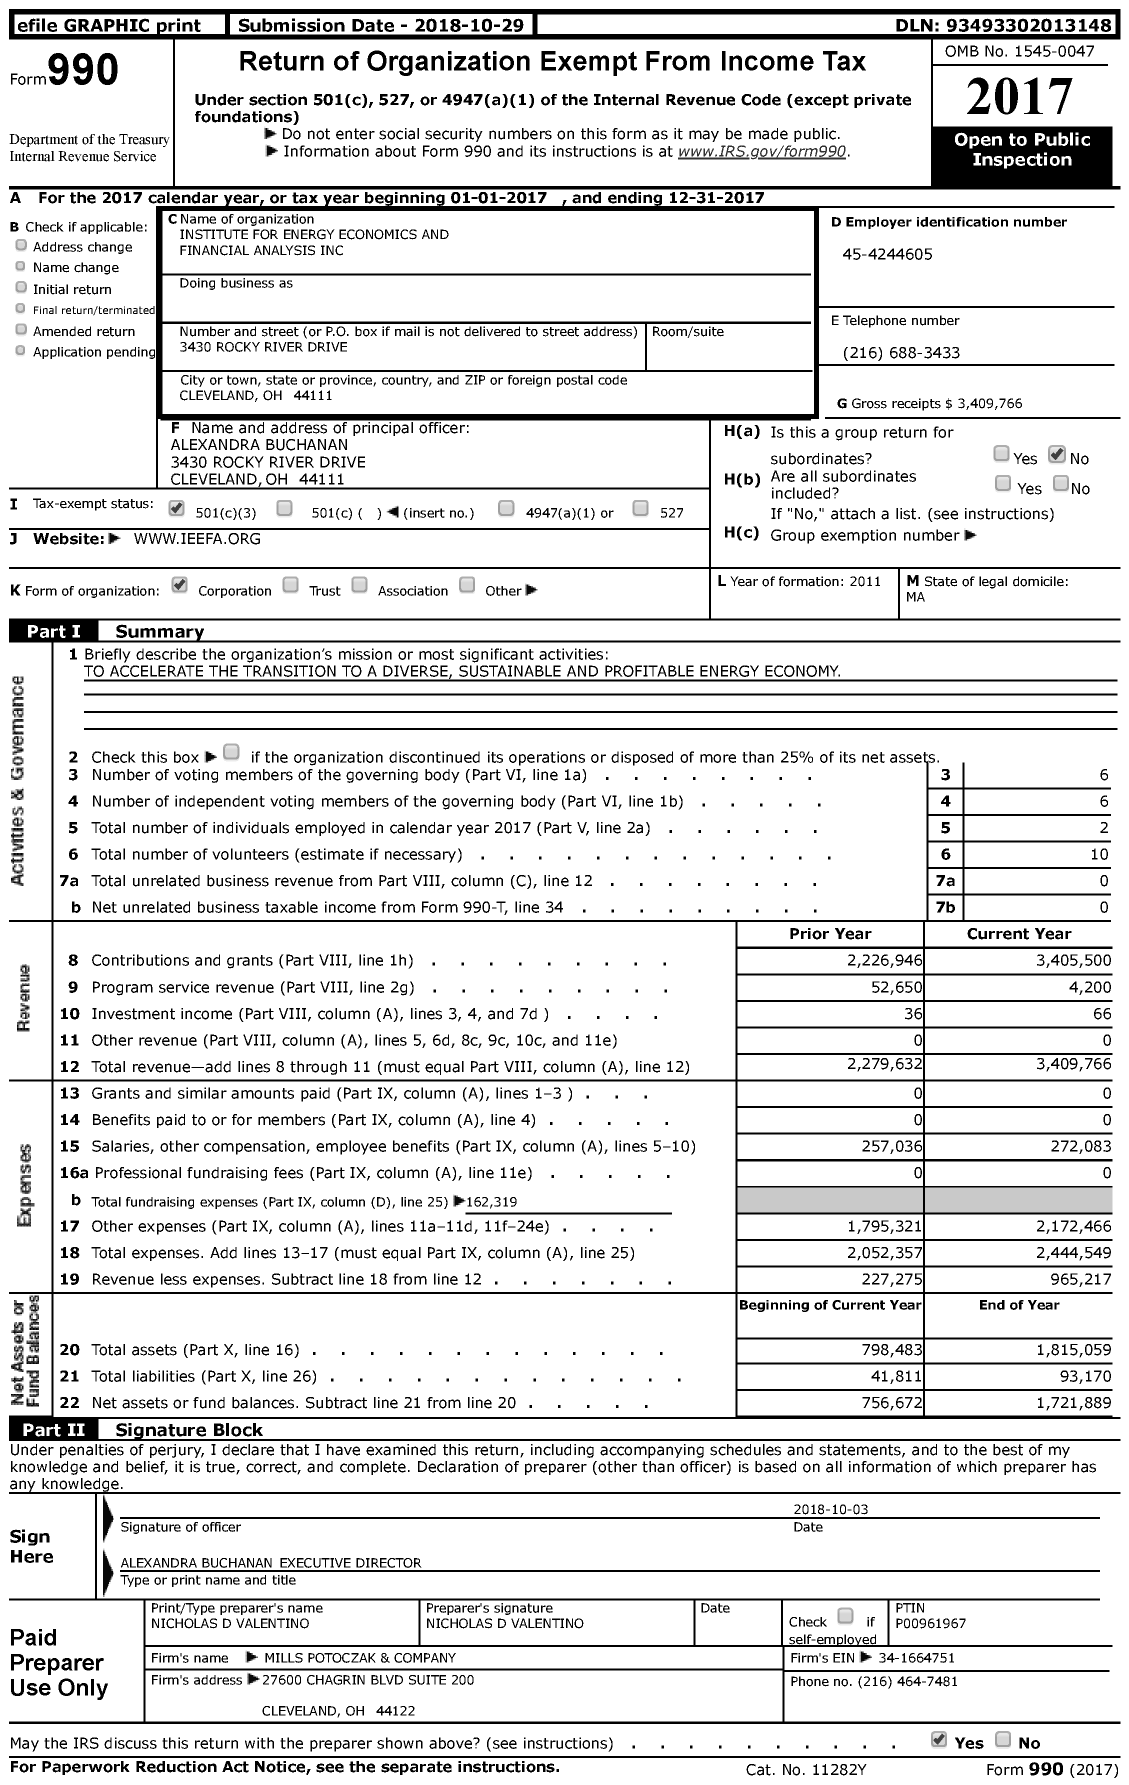 Image of first page of 2017 Form 990 for Institute for Energy Economics and Financial Analysis